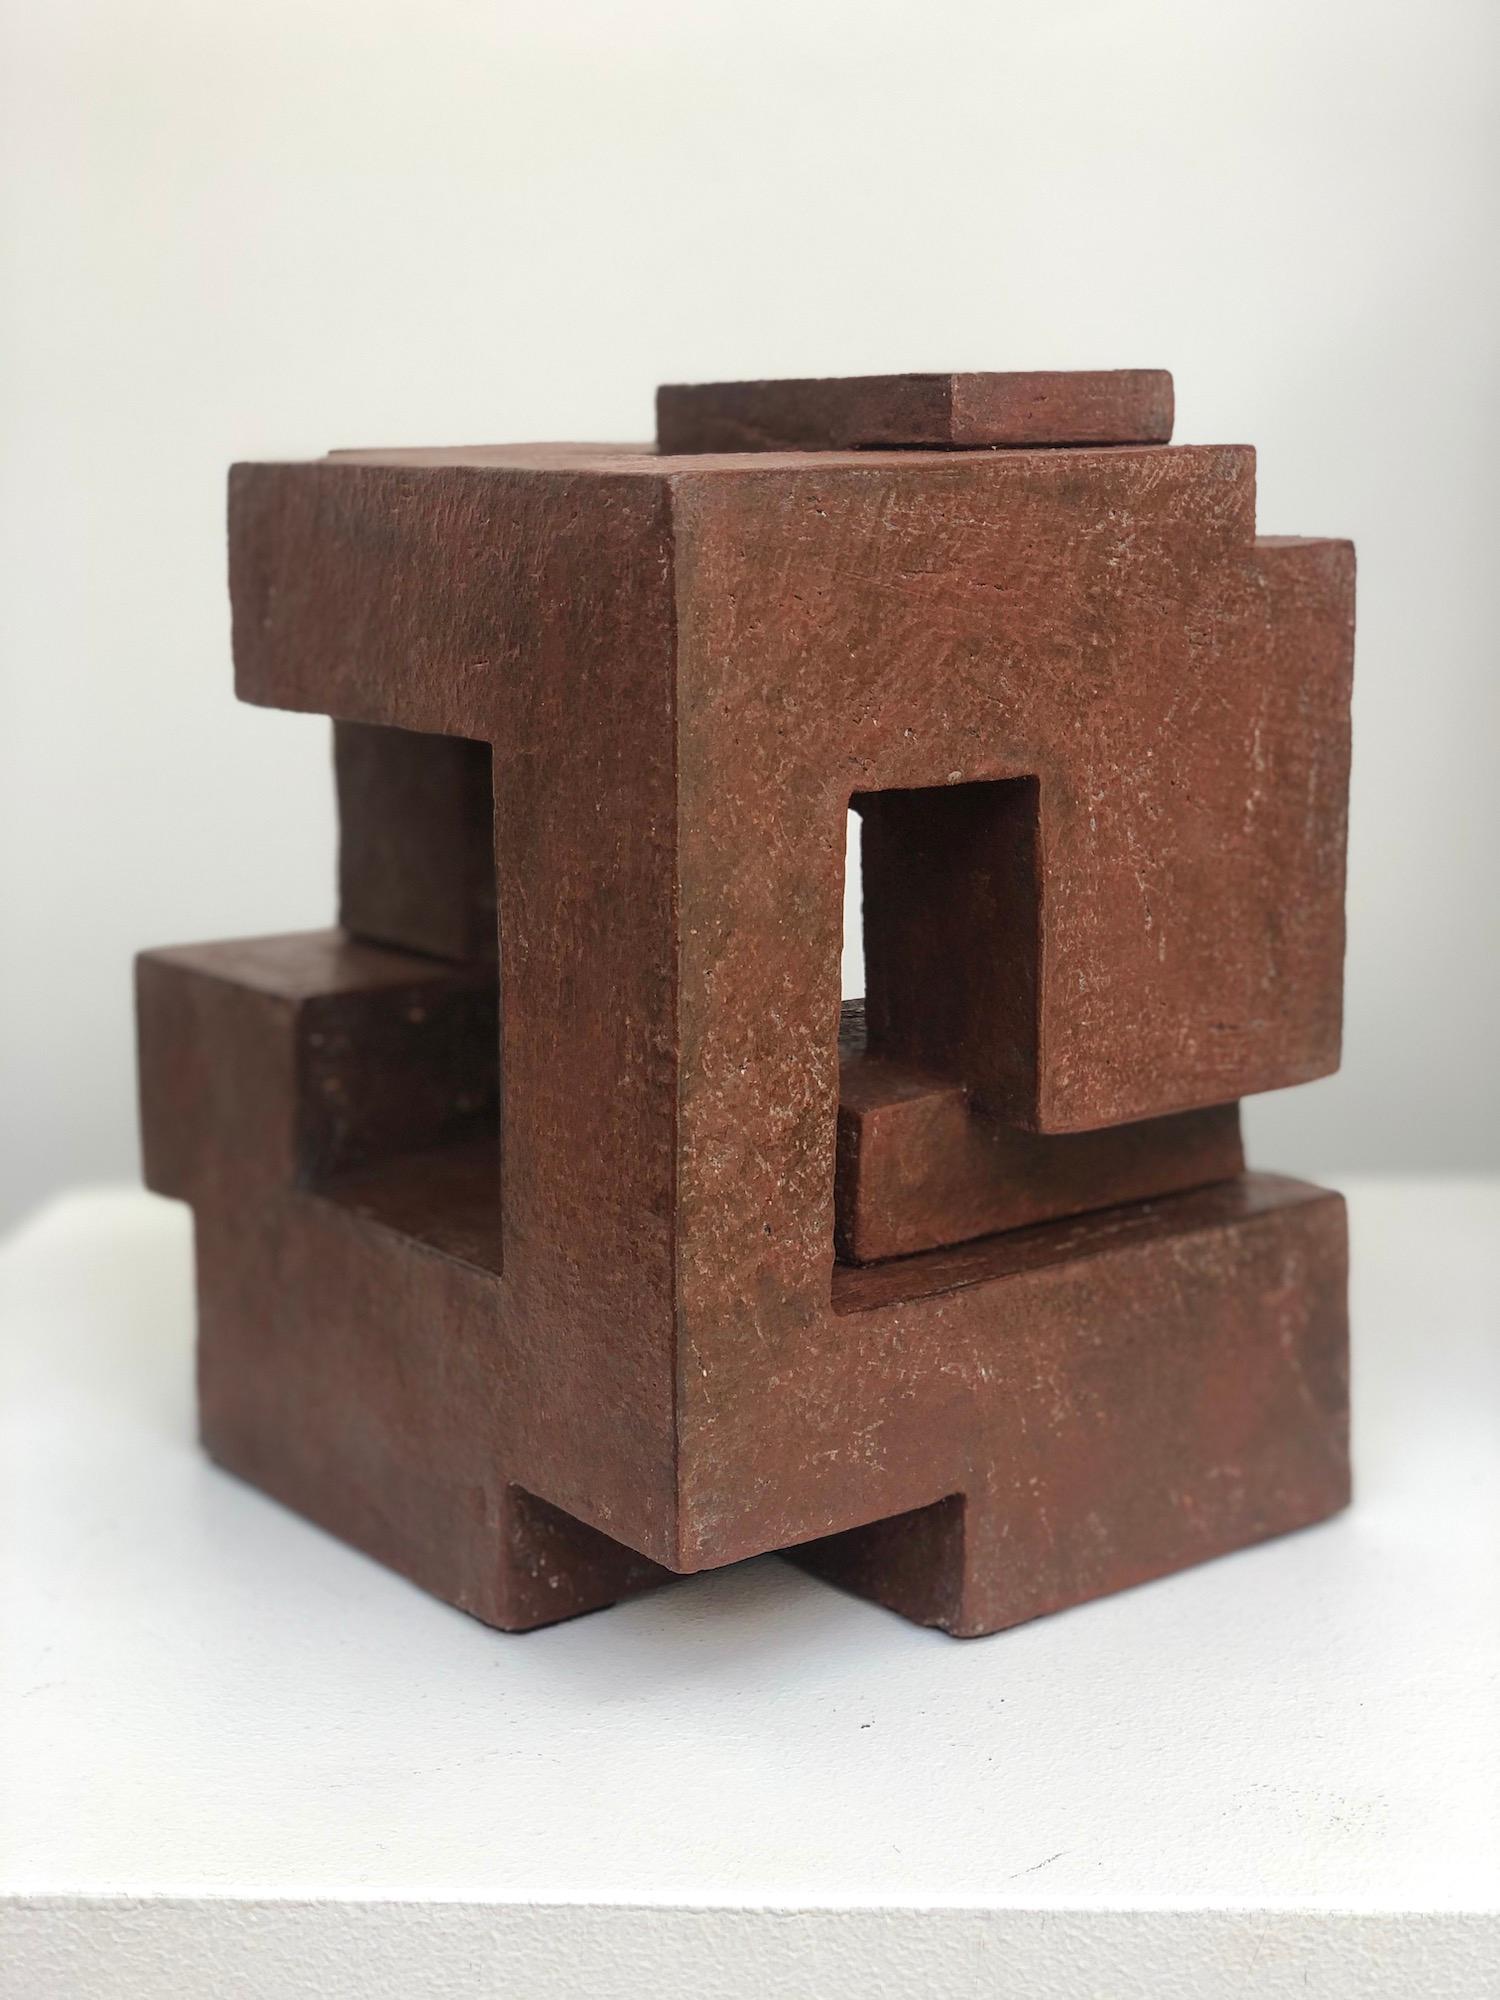 Block VIII is a unique terracotta sculpture by contemporary artist Delphine Brabant, dimensions are 23 cm × 20 cm × 16 cm (9.1 × 7.9 × 6.3 in). The sculpture is signed and comes with a certificate of authenticity.

As she alternates between vertical